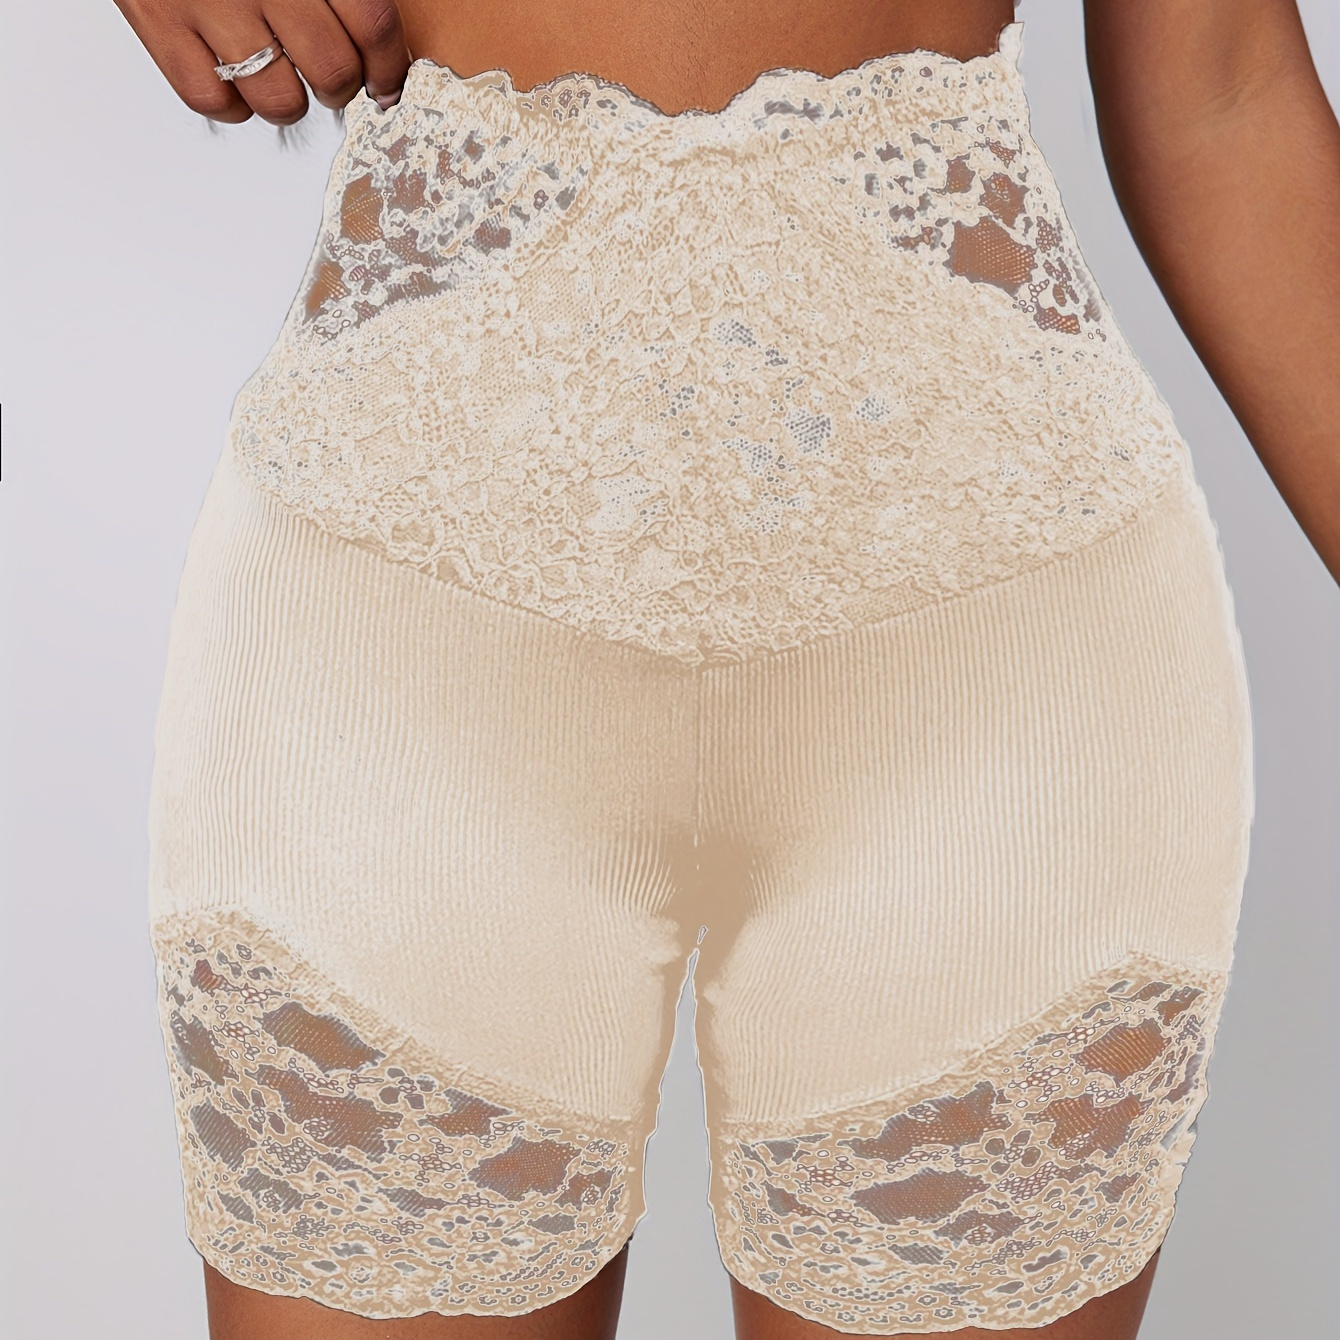 

Contrast Lace Skinny Shorts, Elegant High Waist Stretchy Leggings For Spring & Summer, Women's Clothing